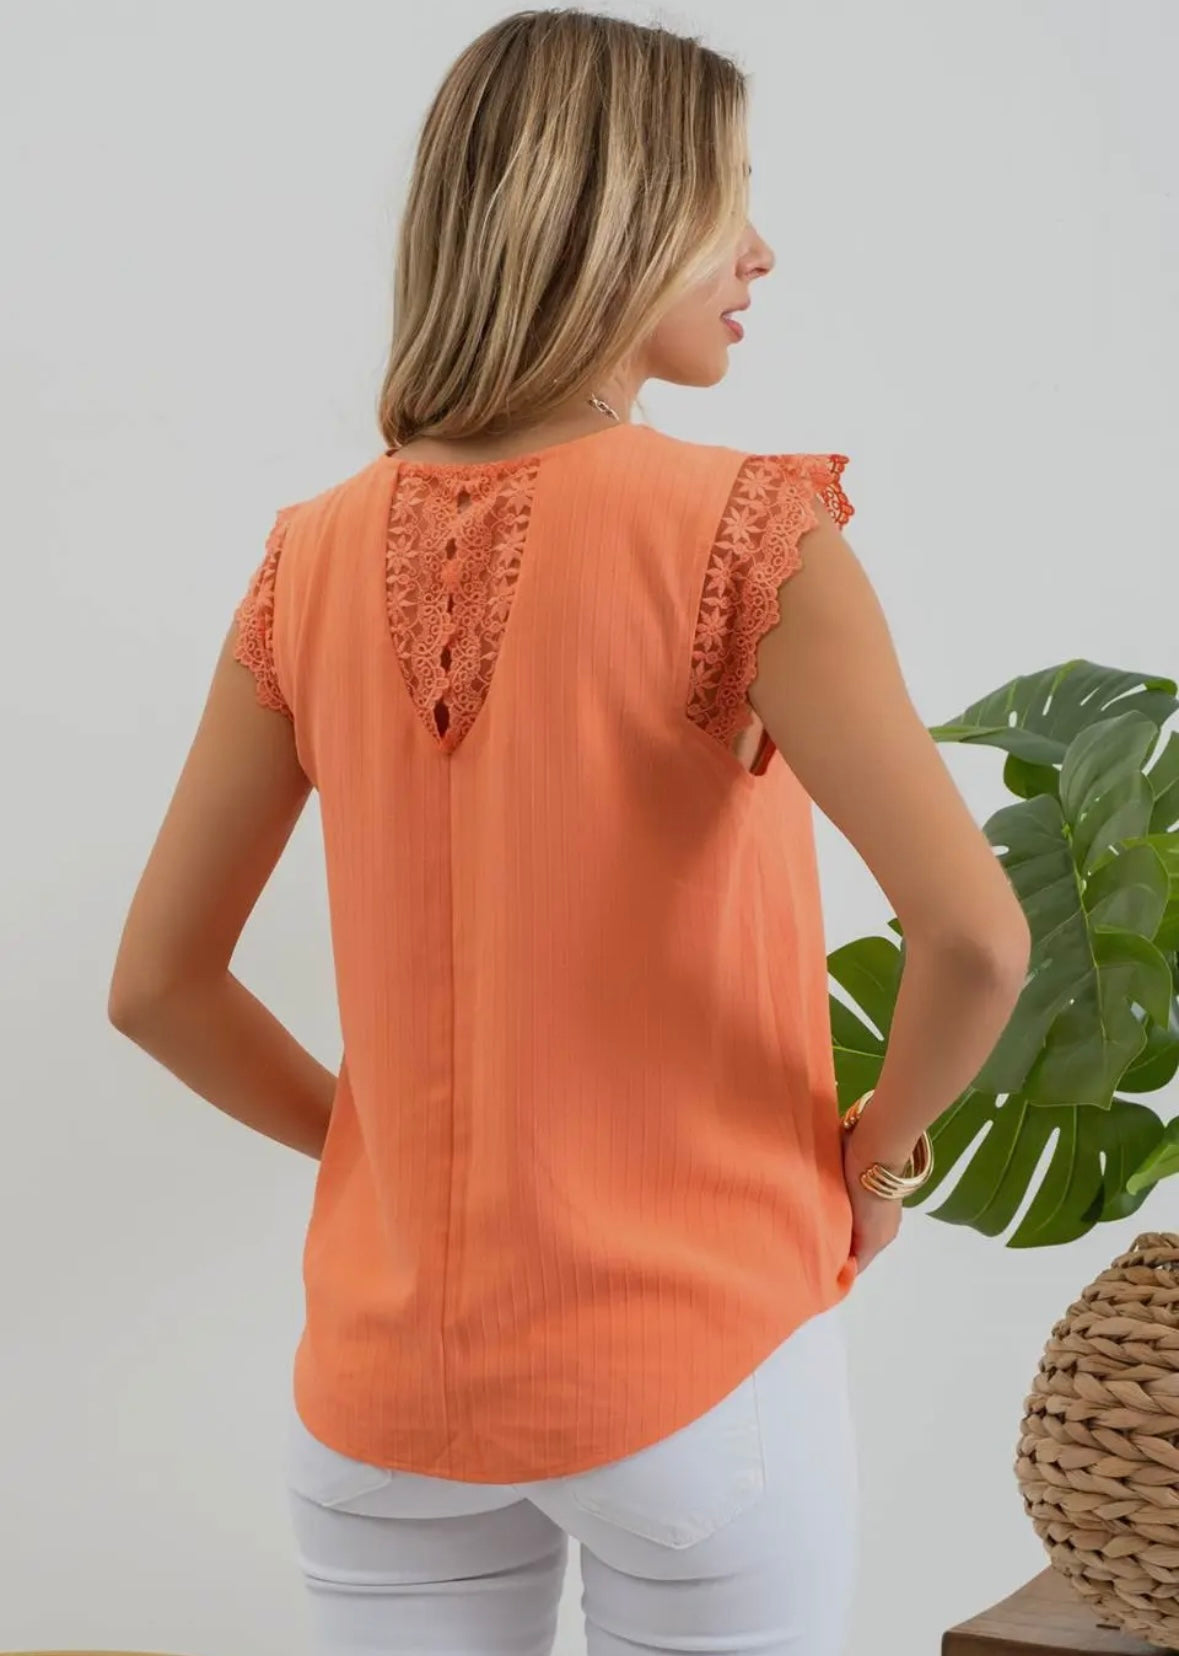 The Candace Top